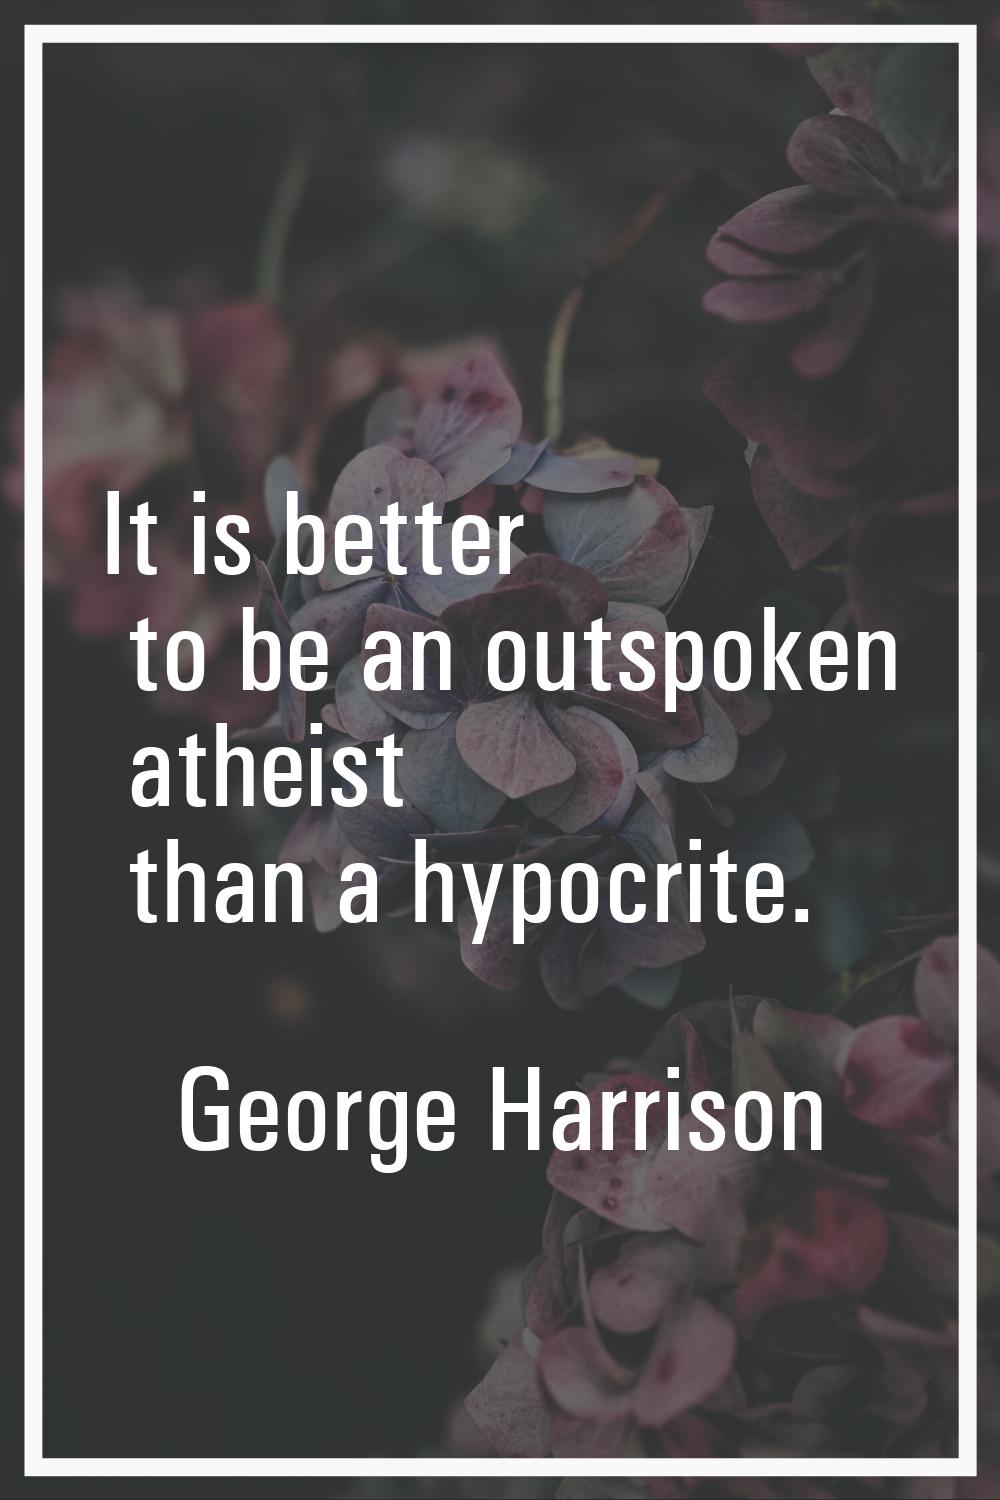 It is better to be an outspoken atheist than a hypocrite.